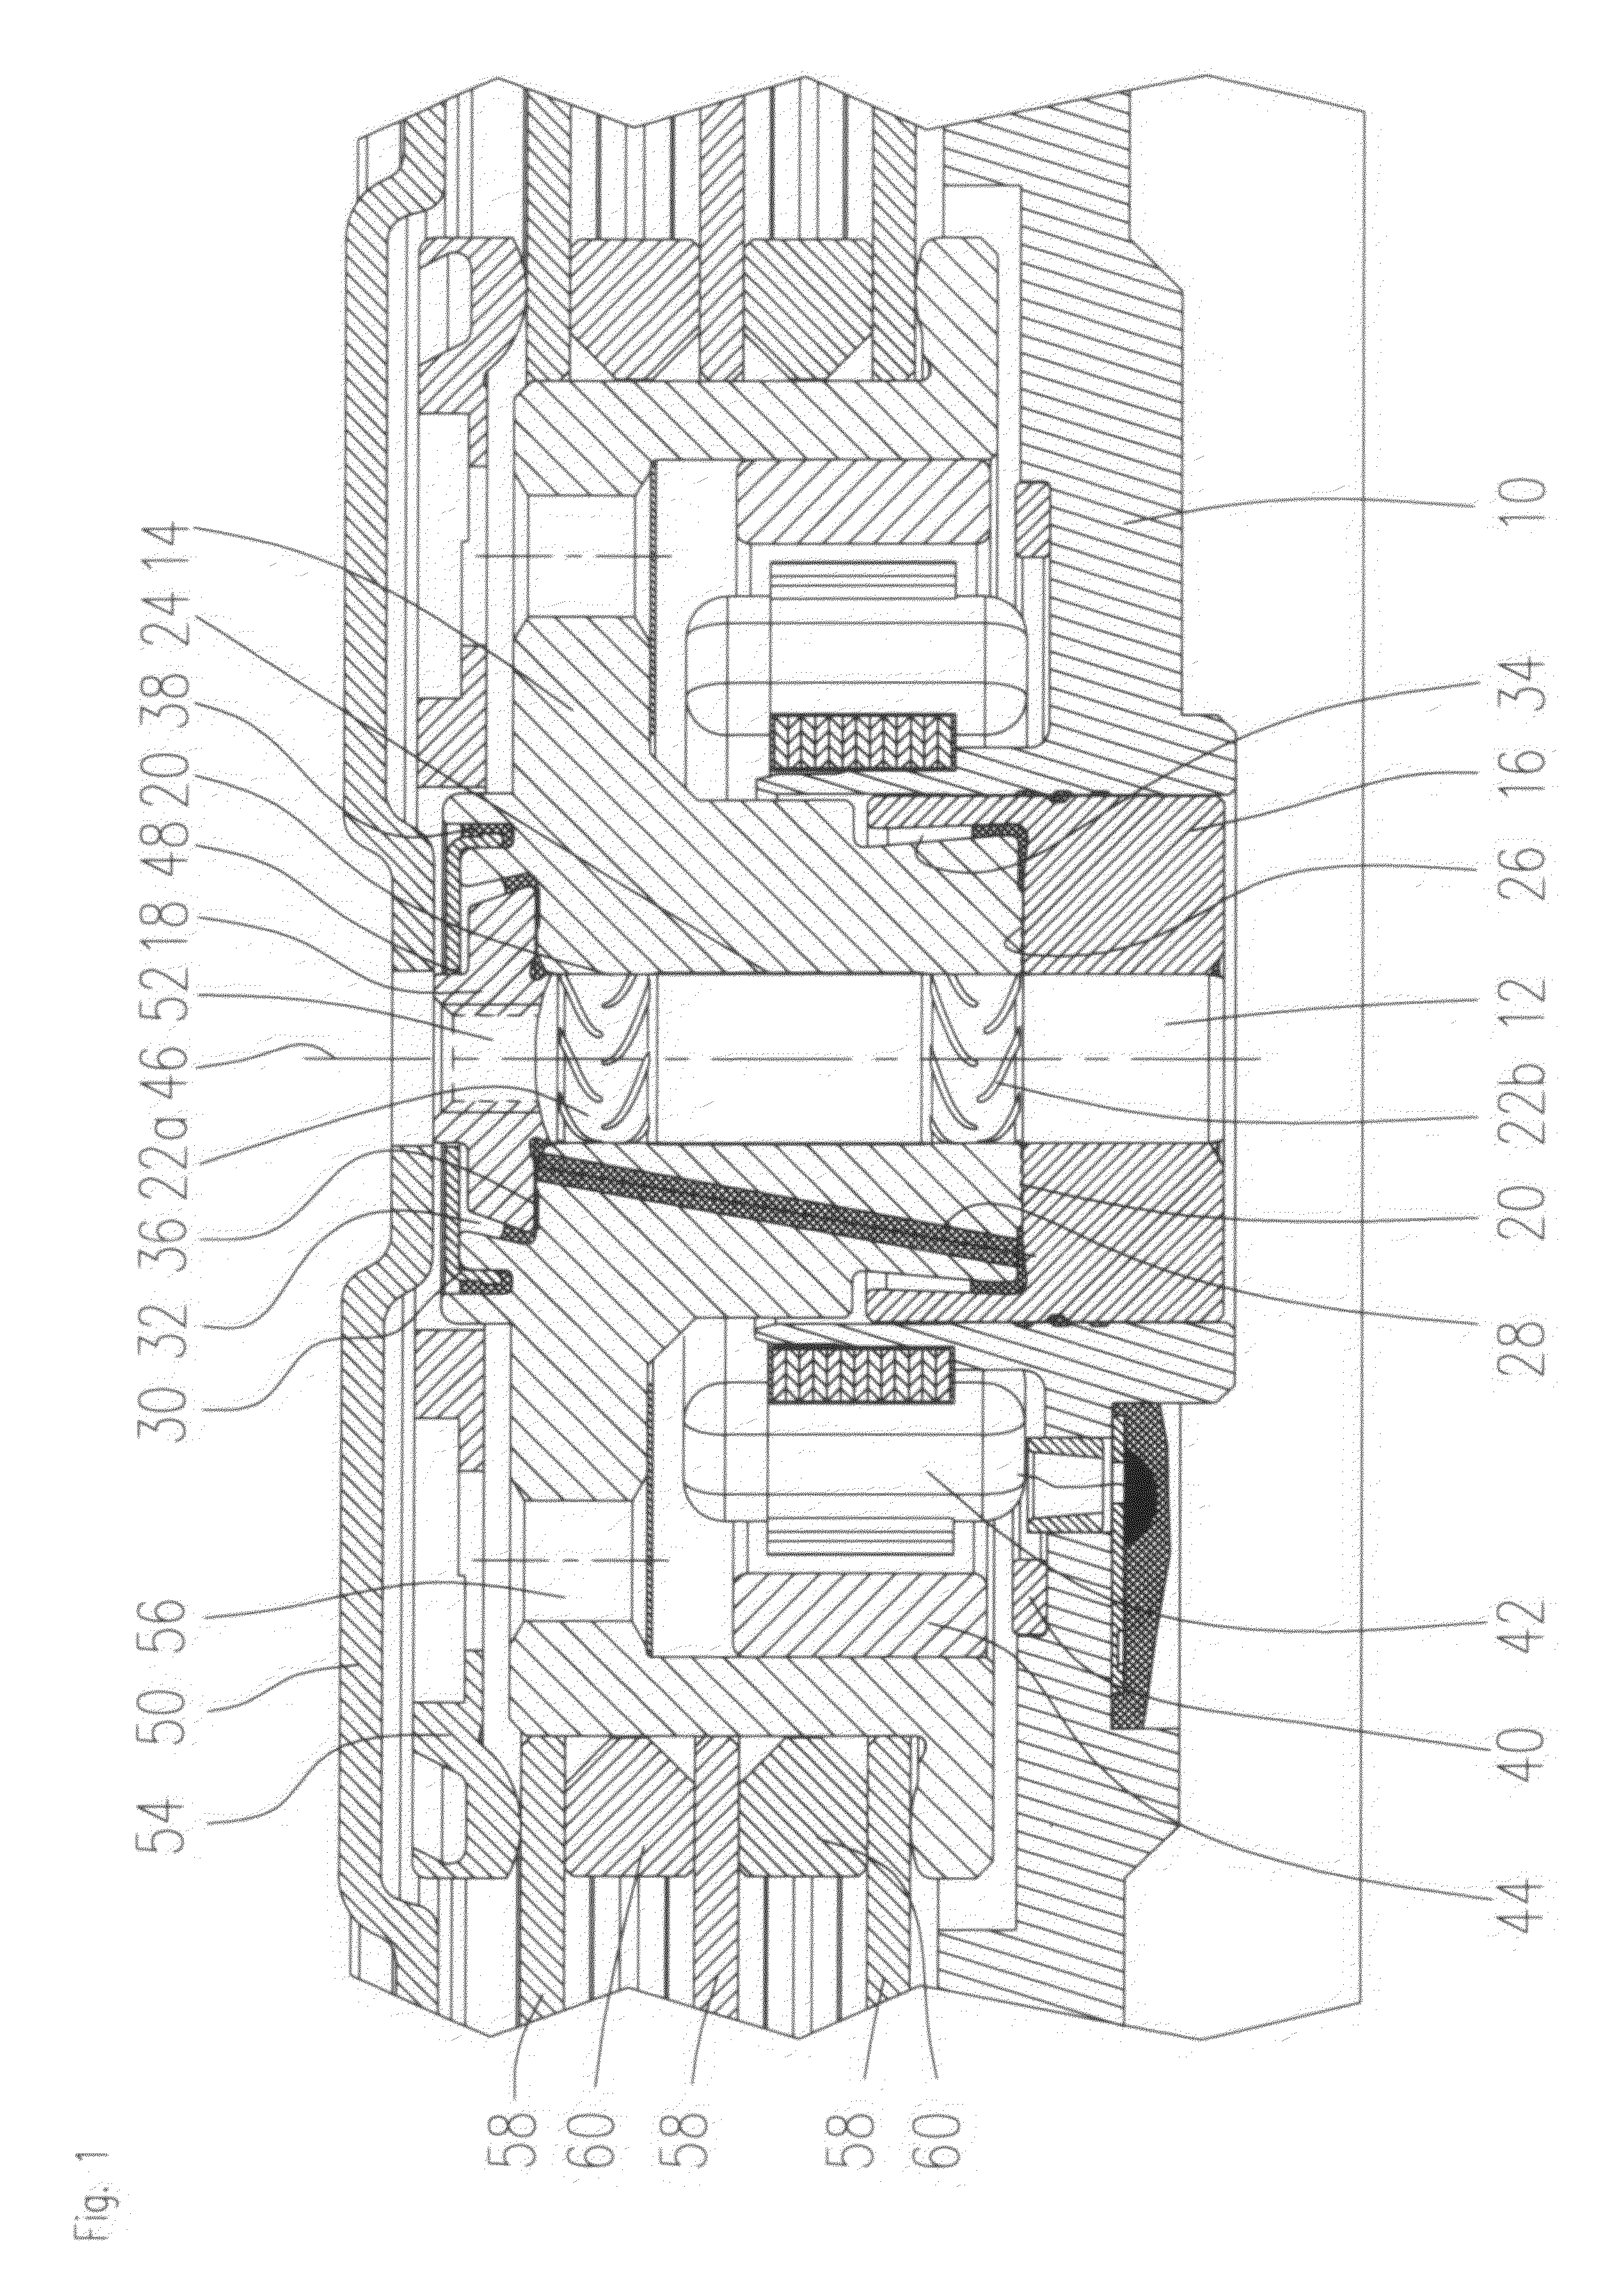 Spindle motor having a fluid dynamic bearing system and a stationary shaft